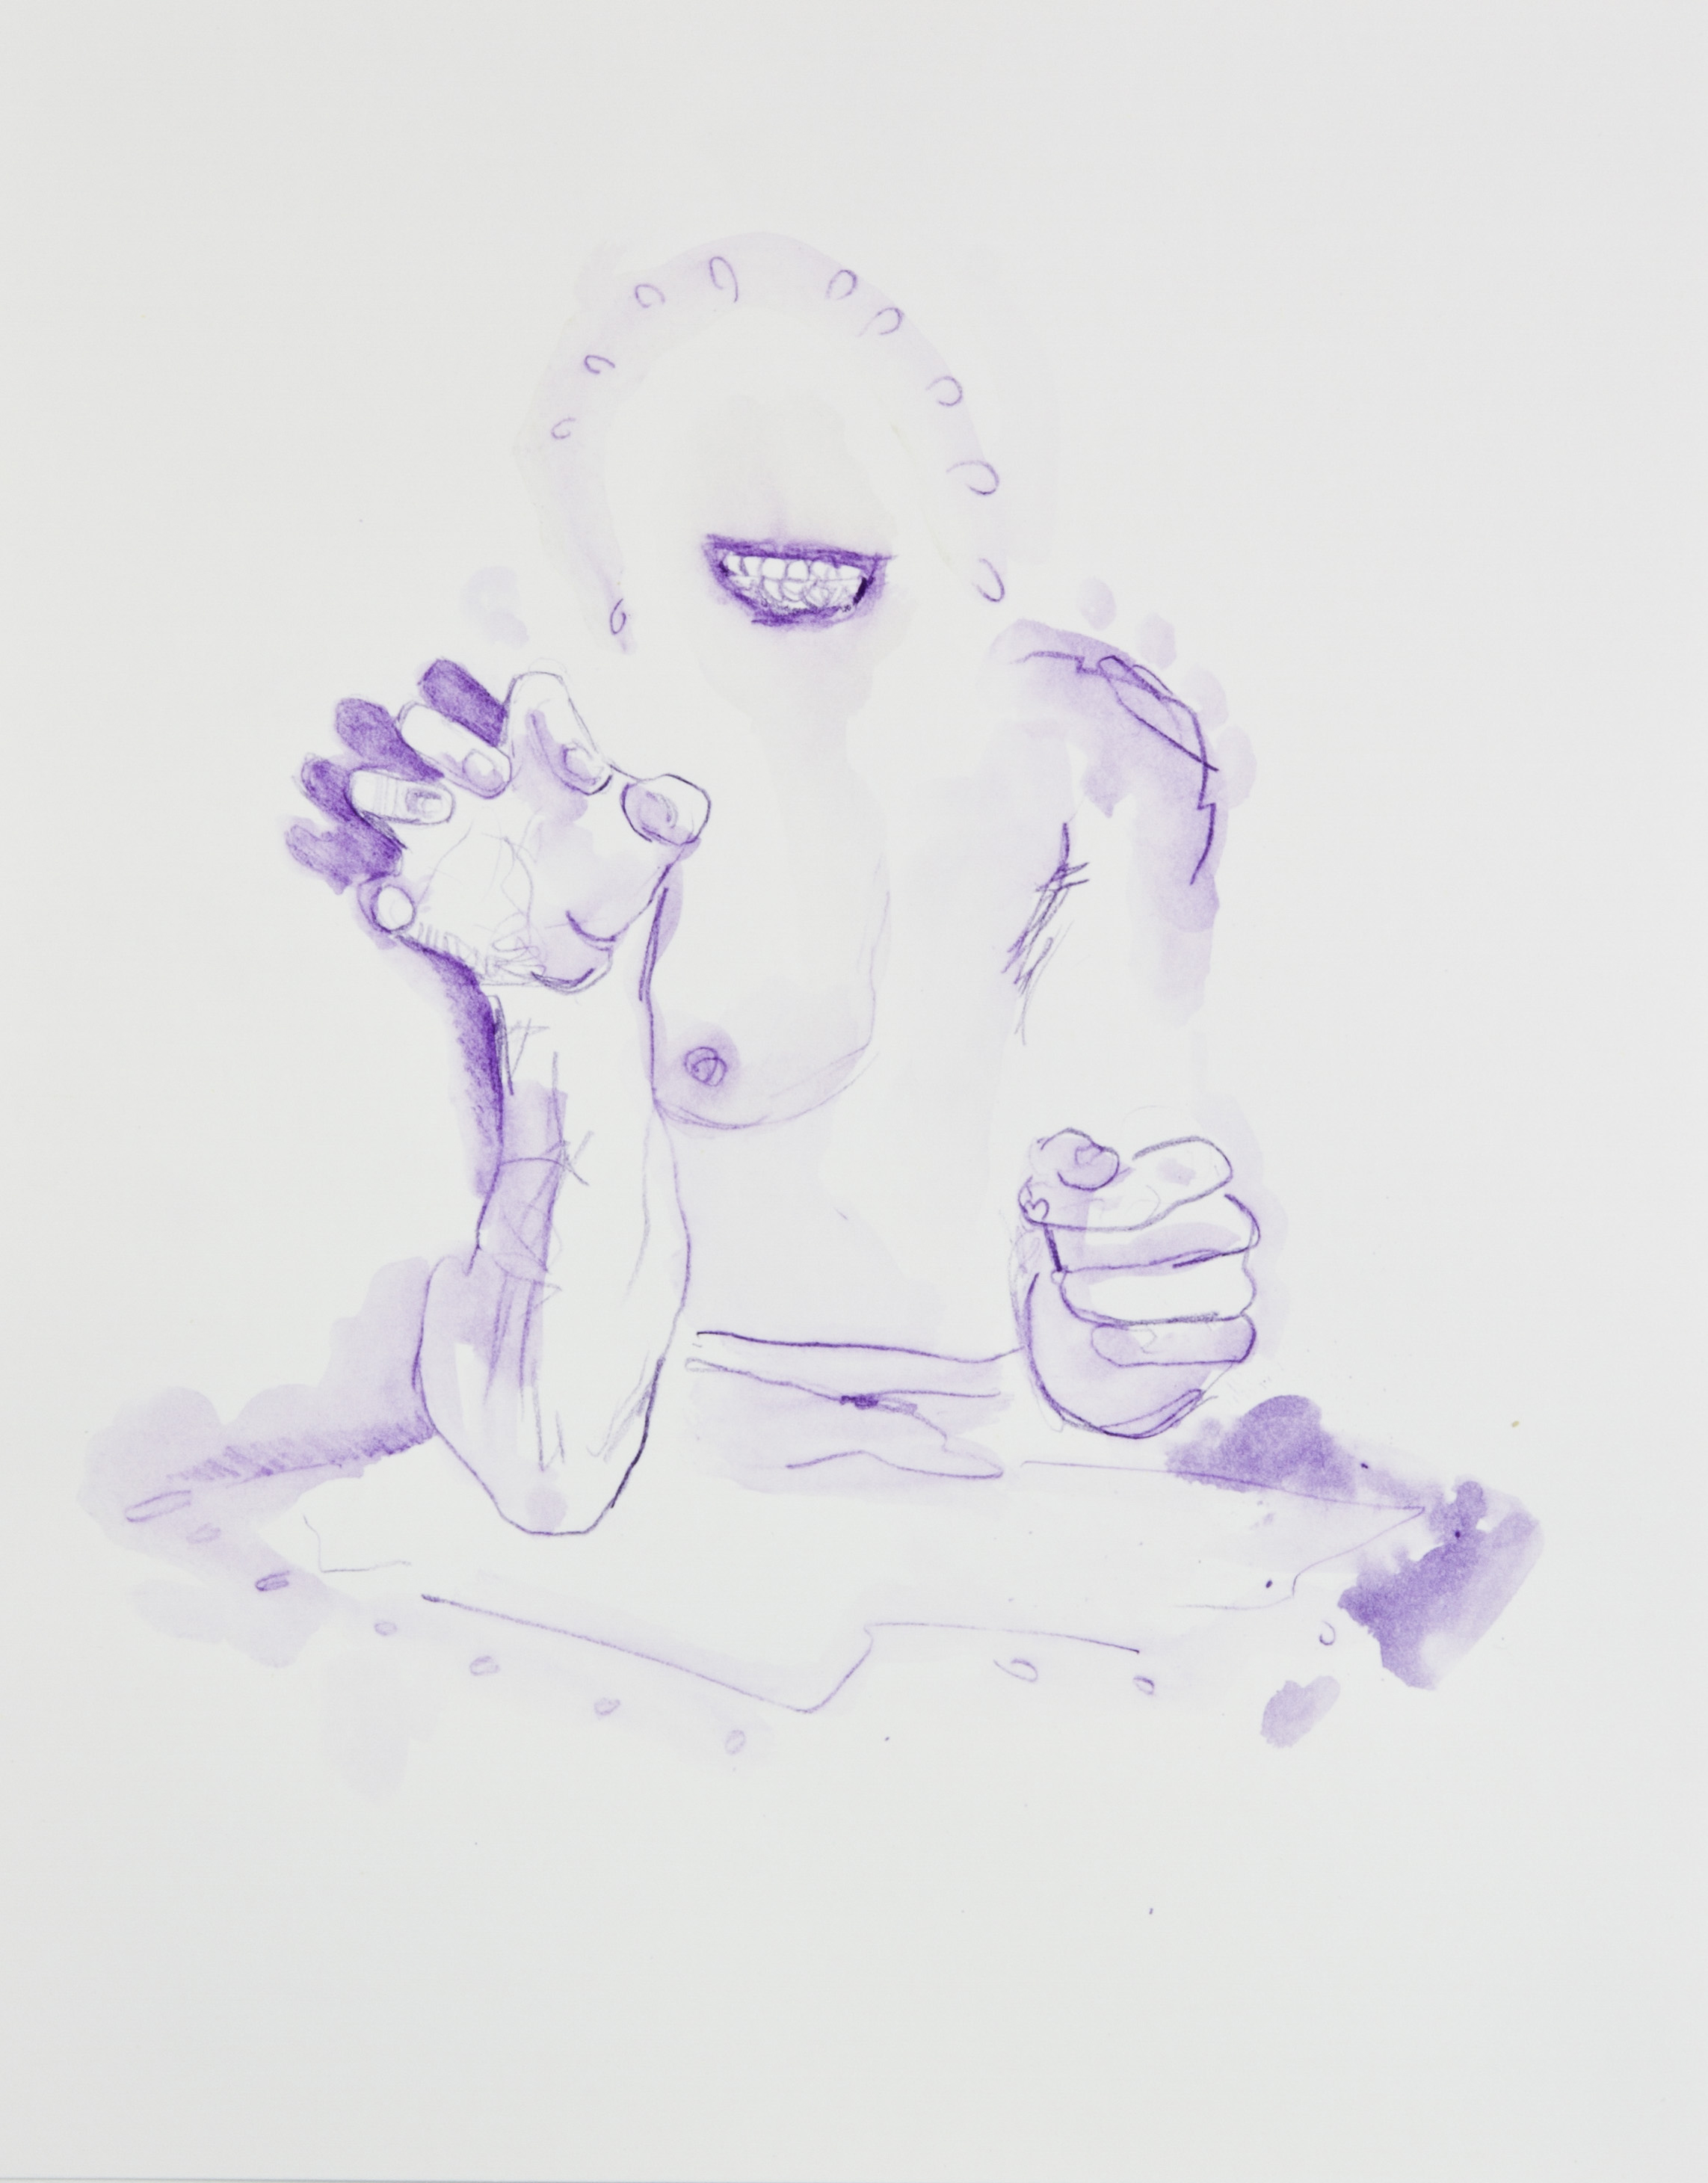 Purple Snarl Thingy, 2013, graphite, crayon and watercolor pencil on paper, 11x14 inches